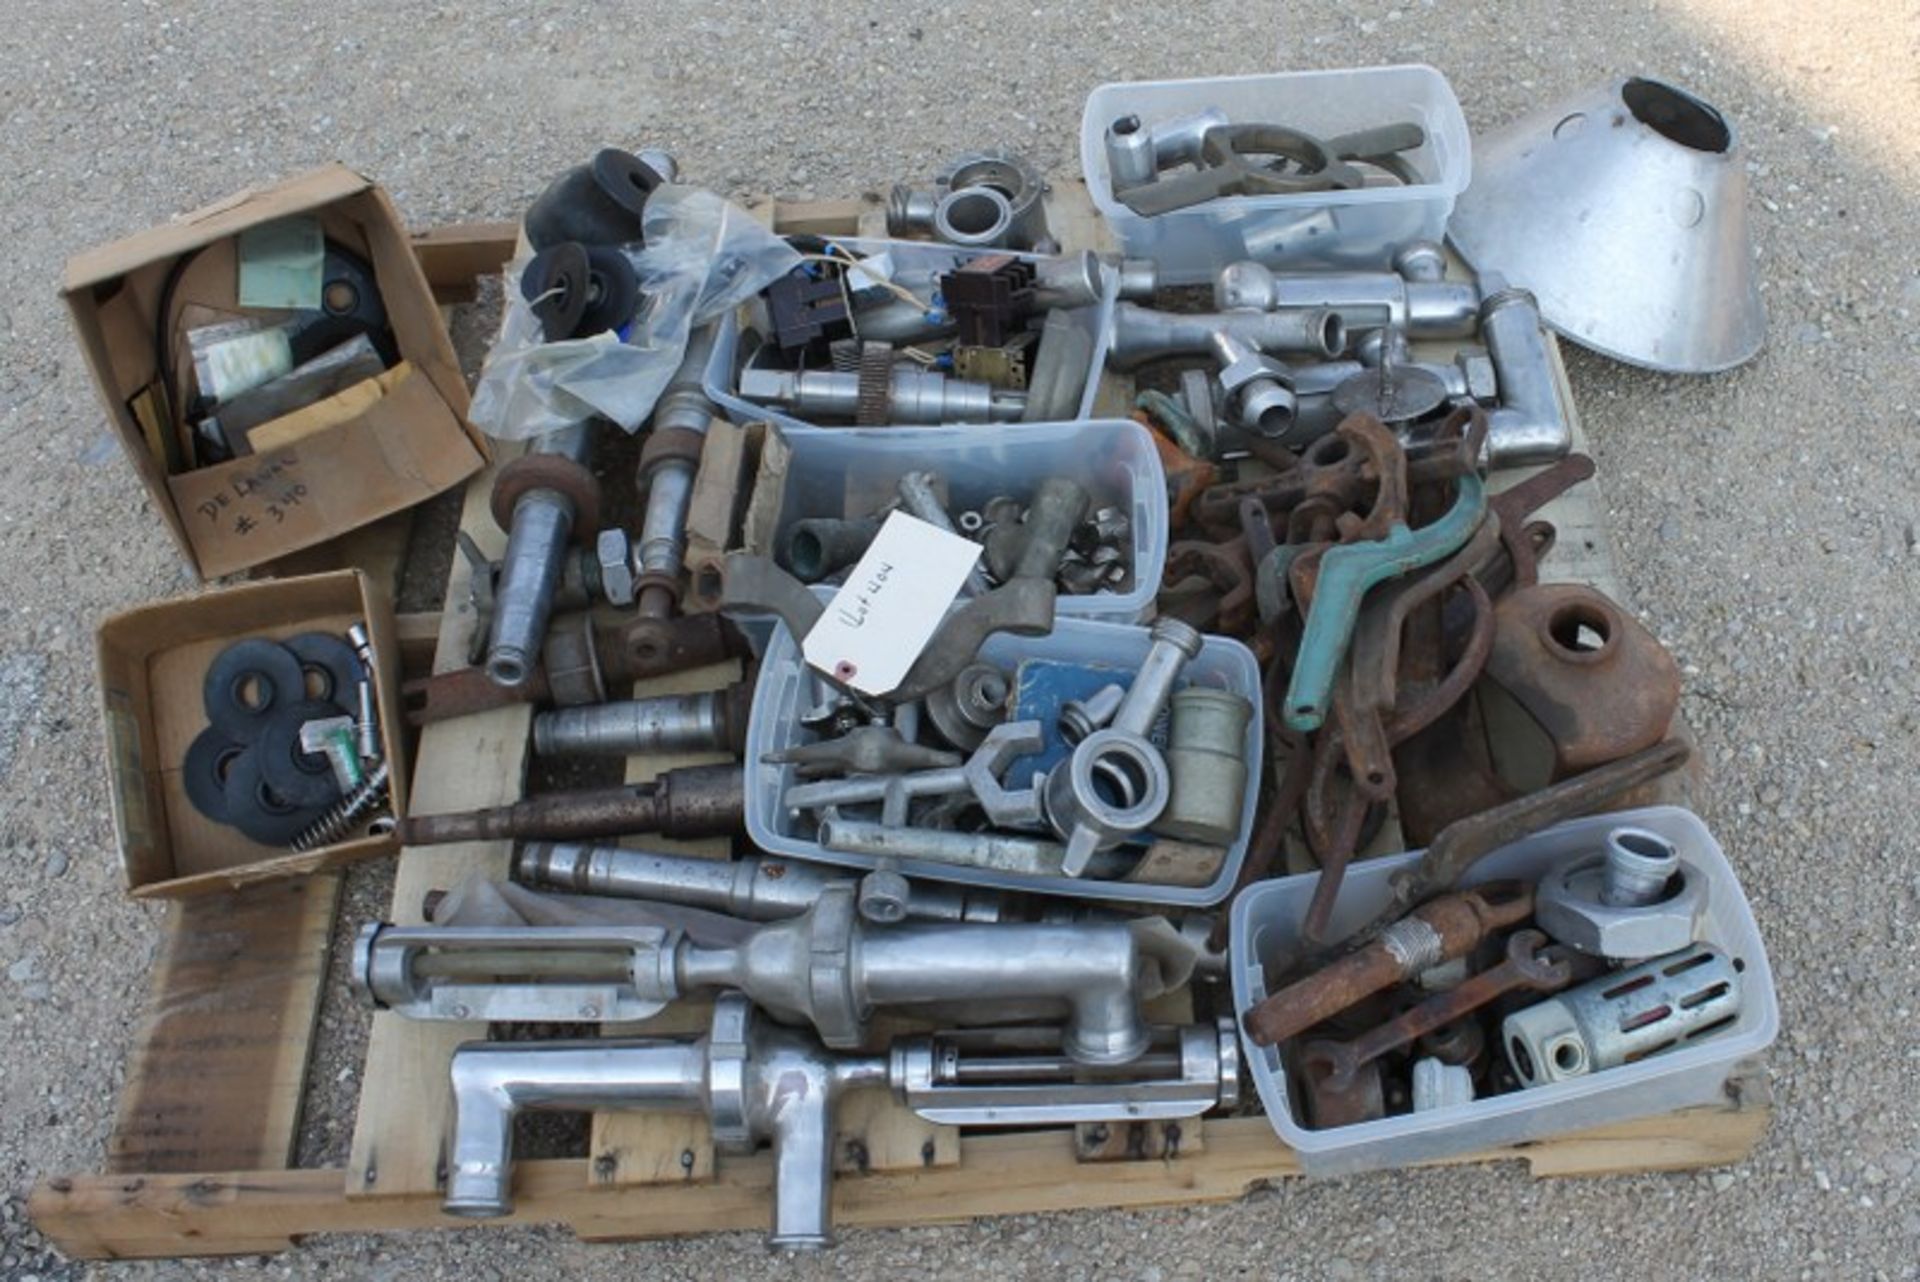 Huge Lot of Assorted Separator parts most DeLaval. Some unused including gears shafts, bearings,